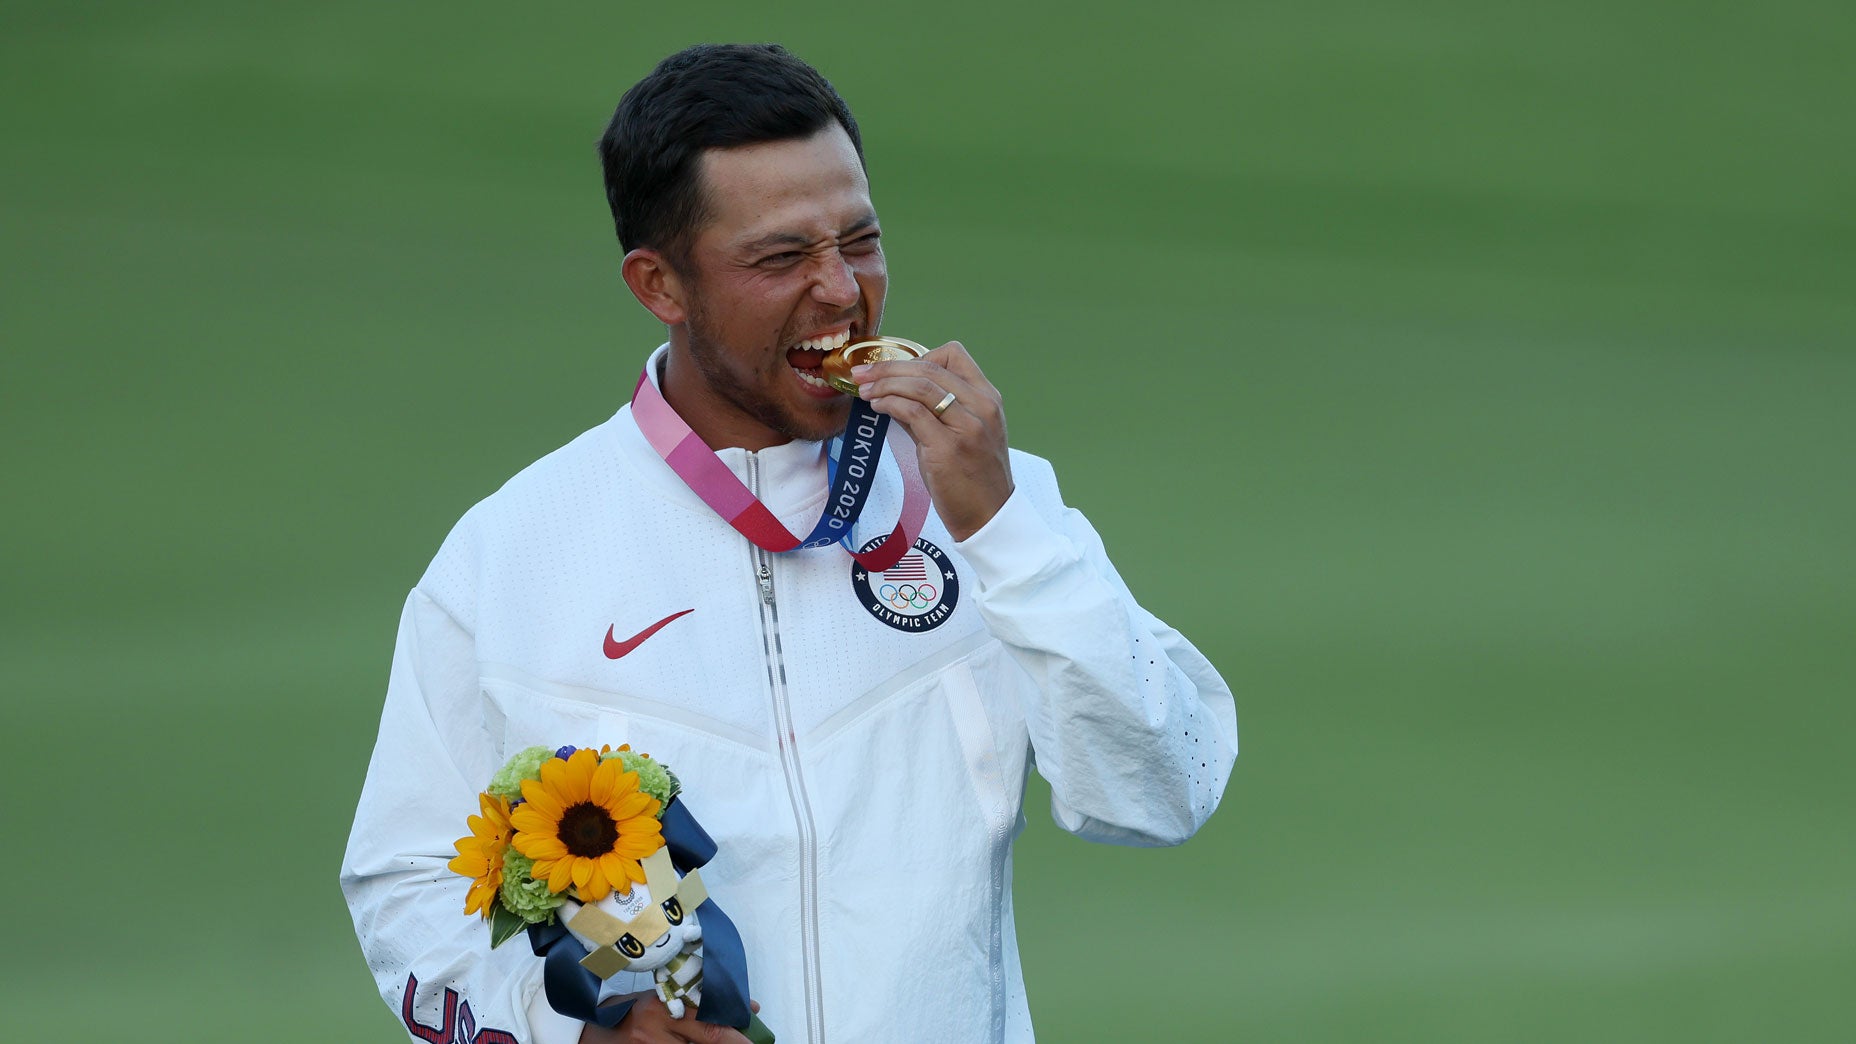 Xander Schauffele wins gold in Olympic golf event: 'Just in shock'